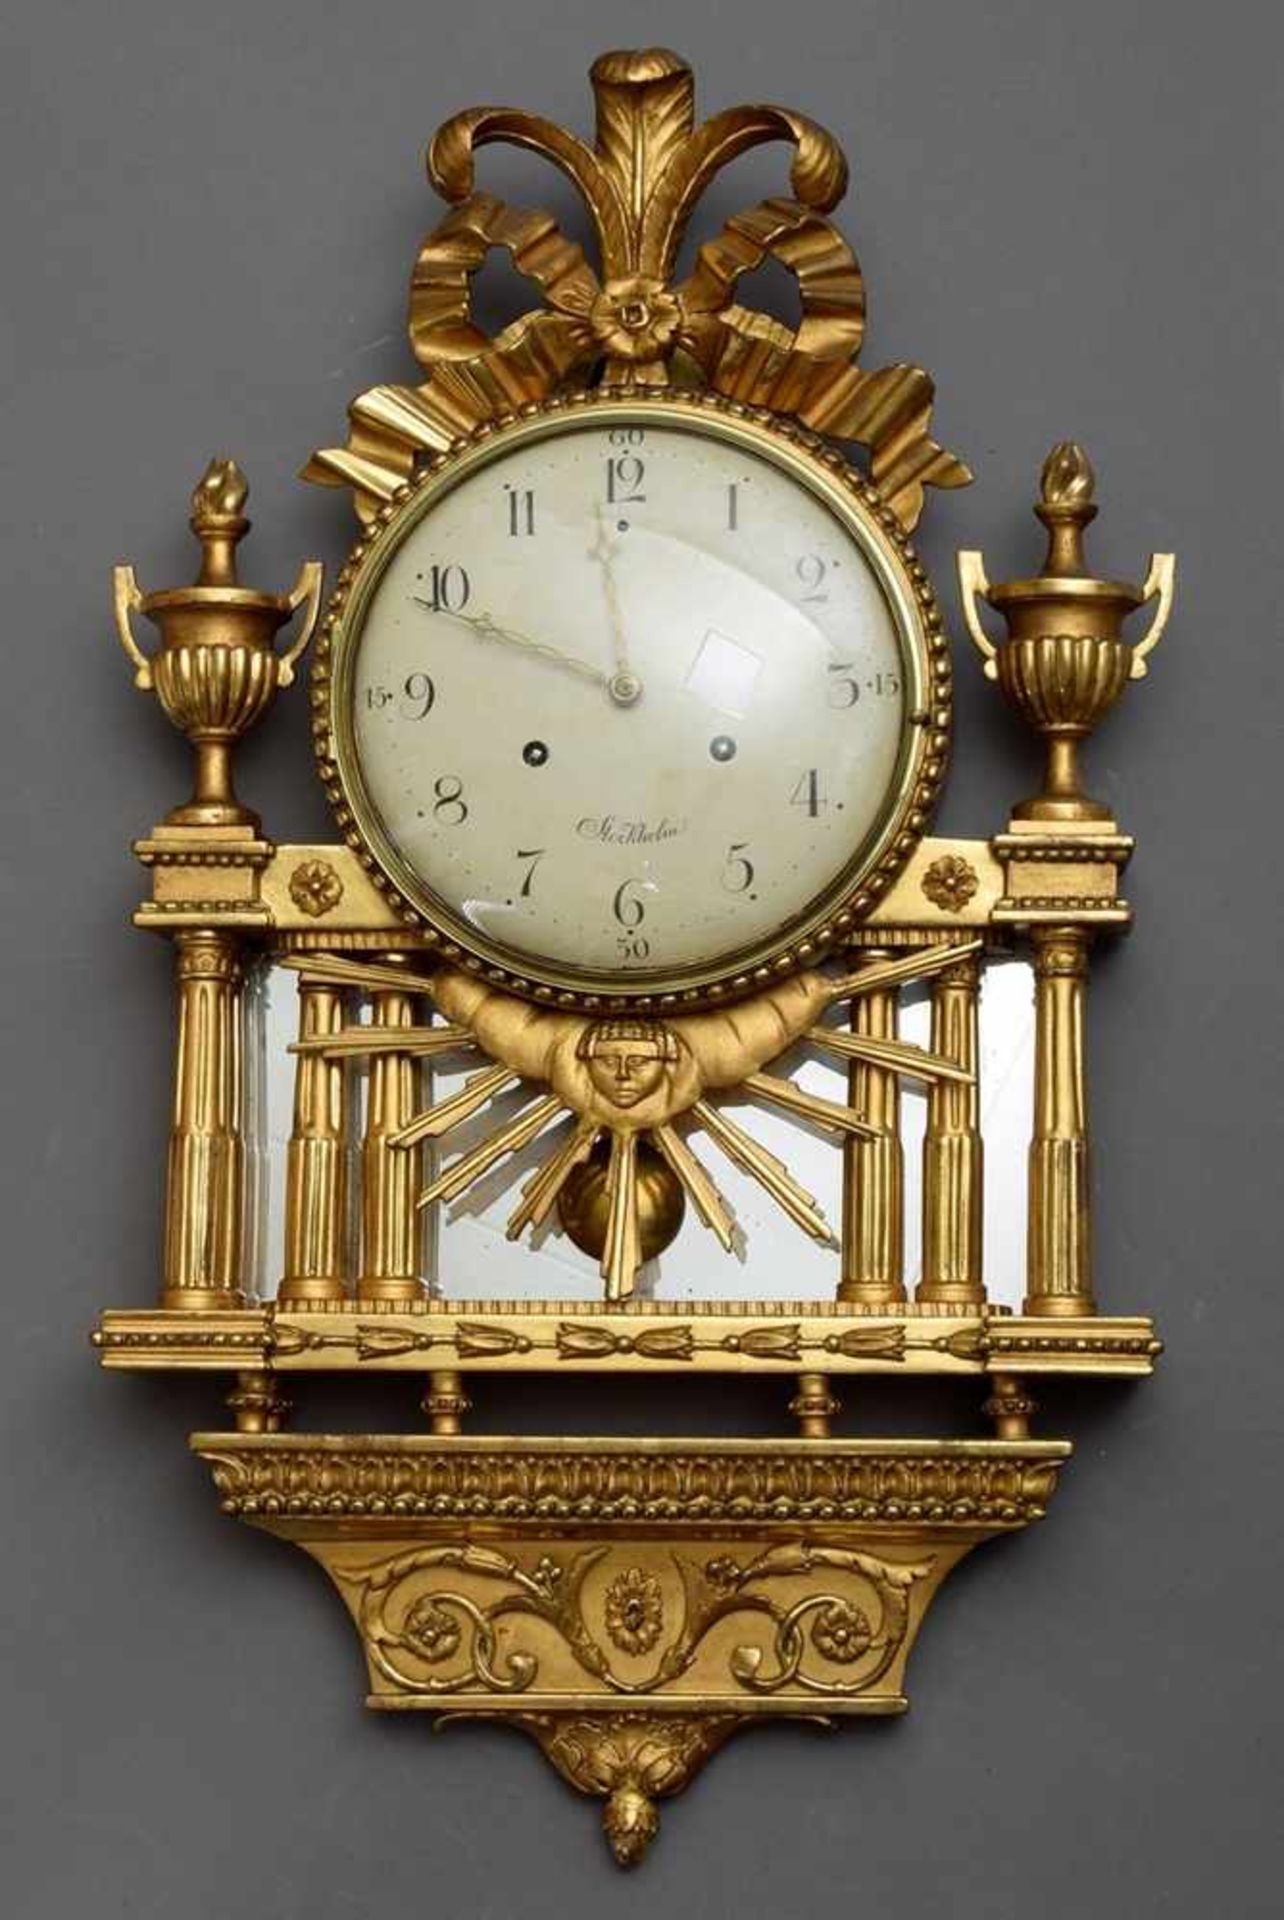 Swedish wall clock in gilded wood framing "Antique temple with sun symbol" and plastic loop - Image 2 of 5